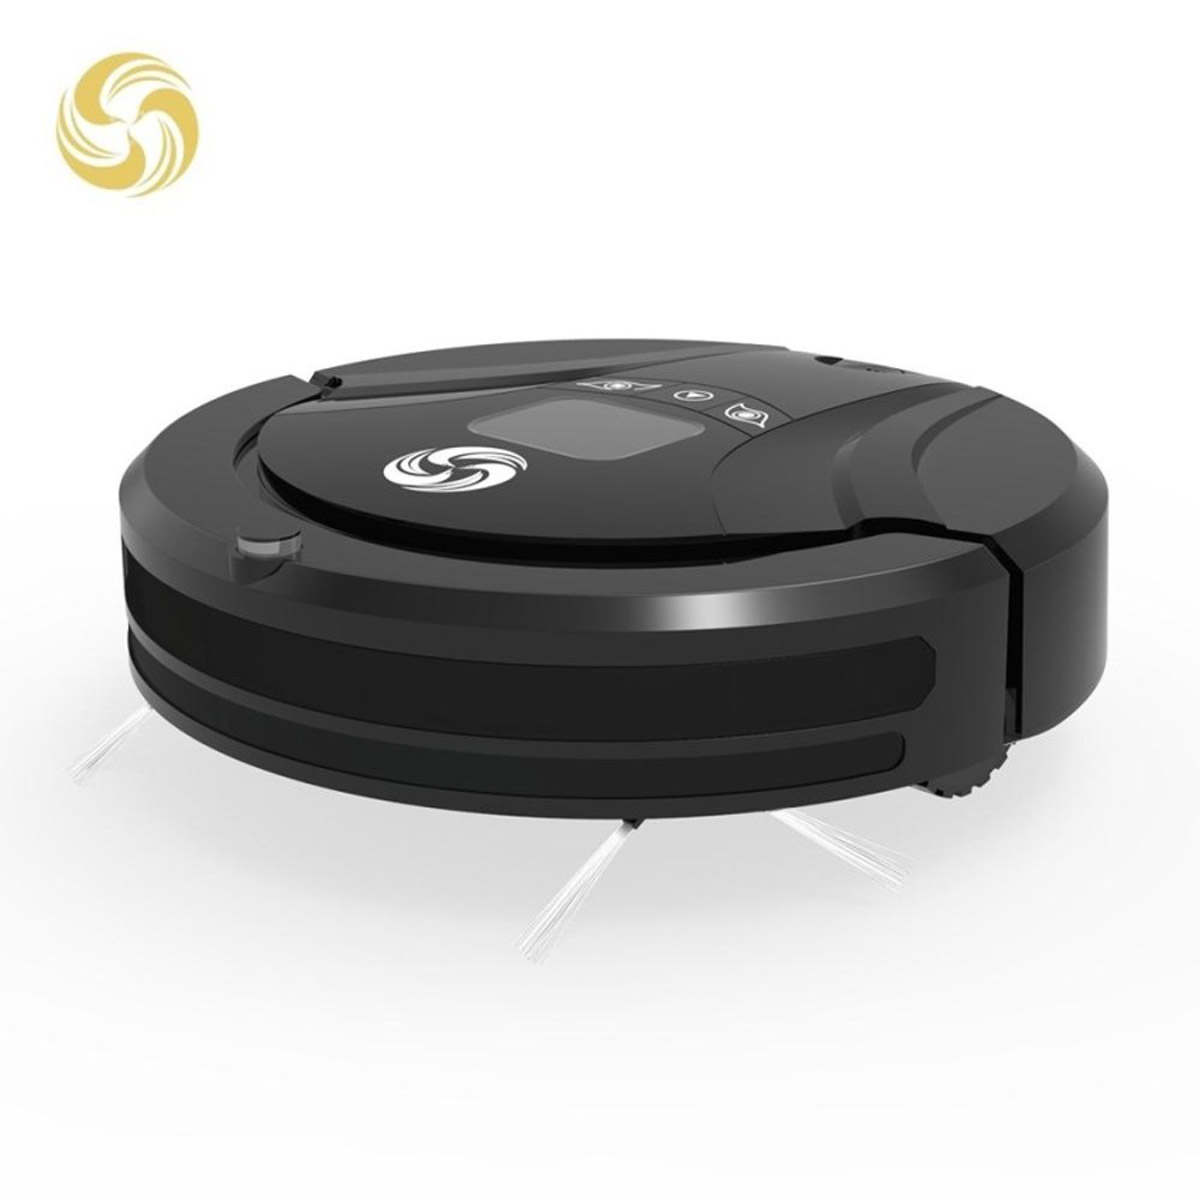 Fr fox robot vacuum cleaner remote control self charging smart sweeper cleaning device intl 1506946331 87927046 39ae2a758e096a2968fd8a9c7ec2b428 zoom